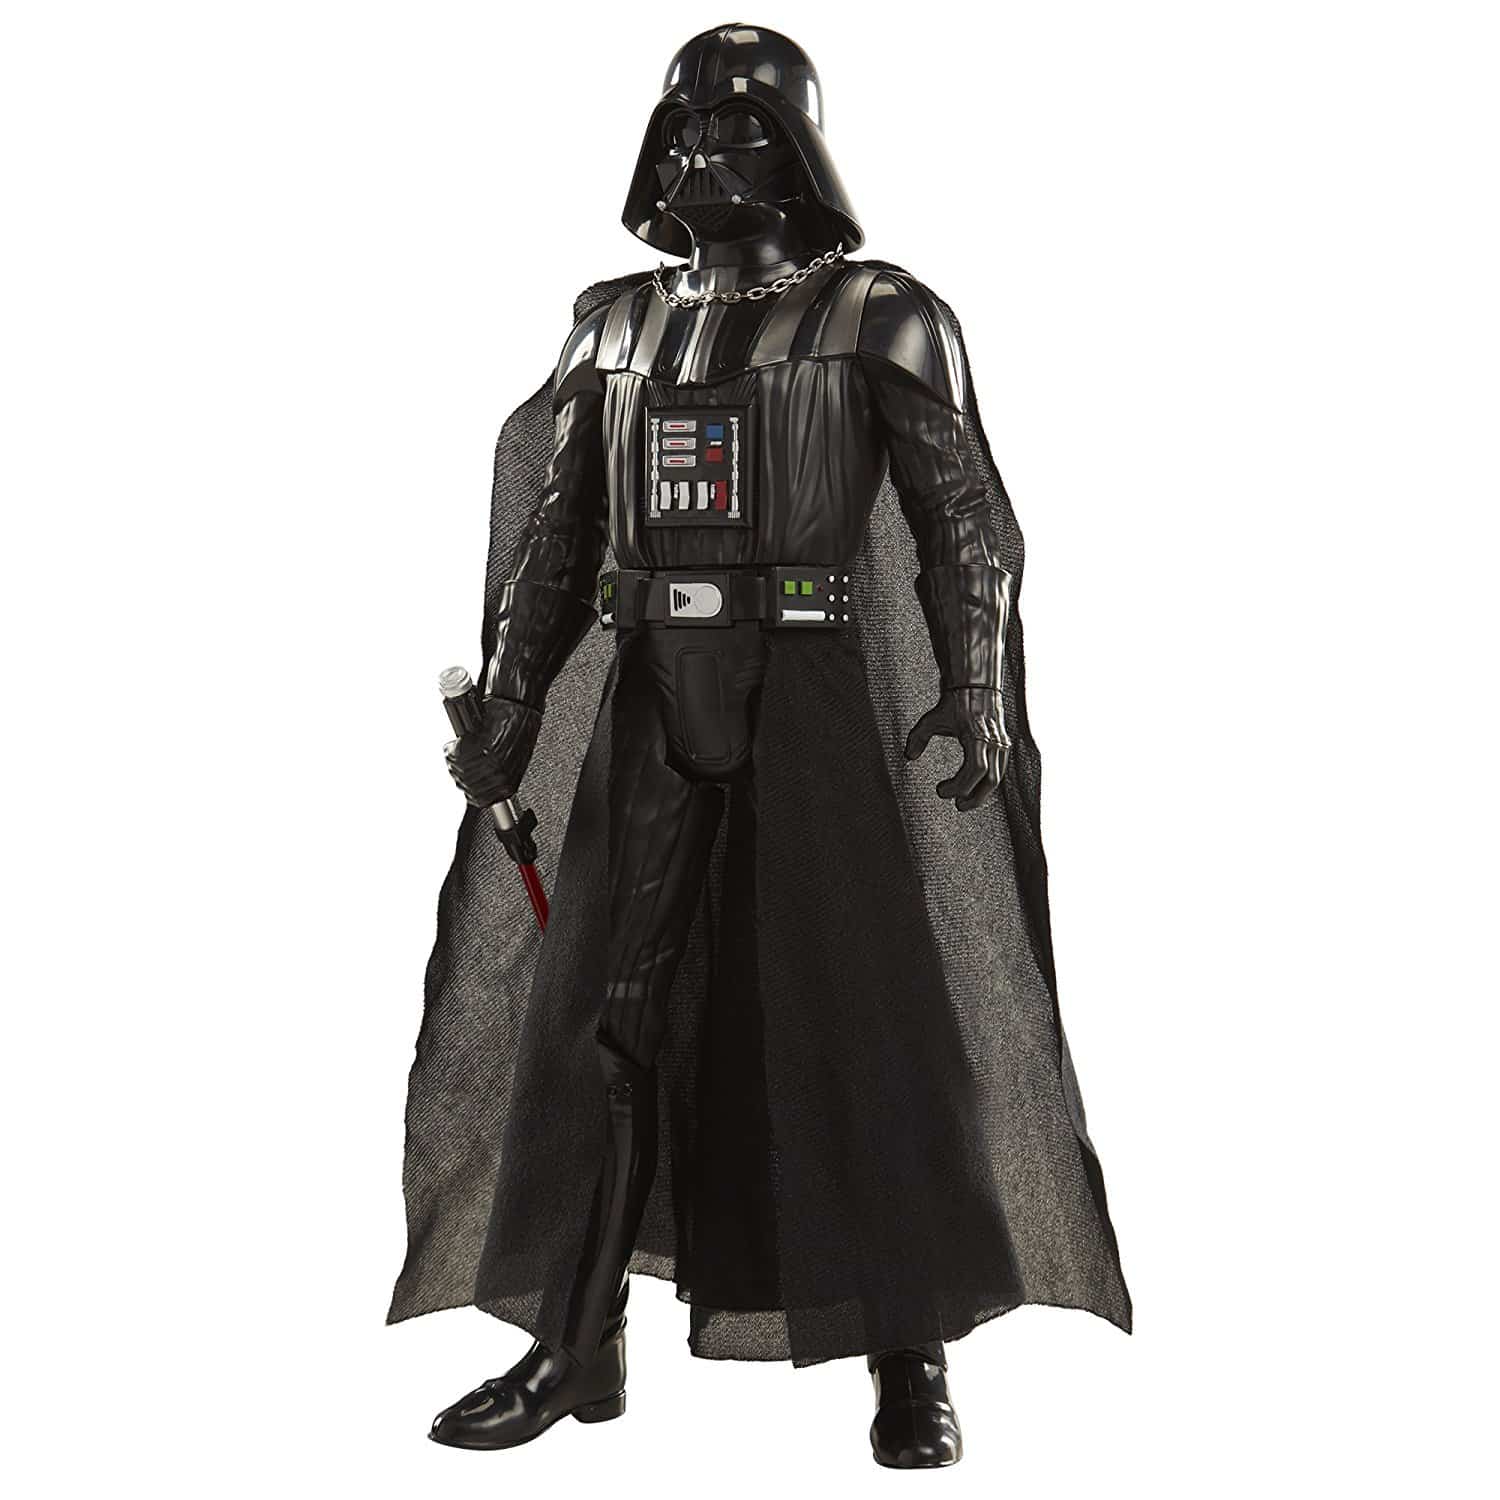 DEAL ALERT: Up to 50% off select Life Size Toys!